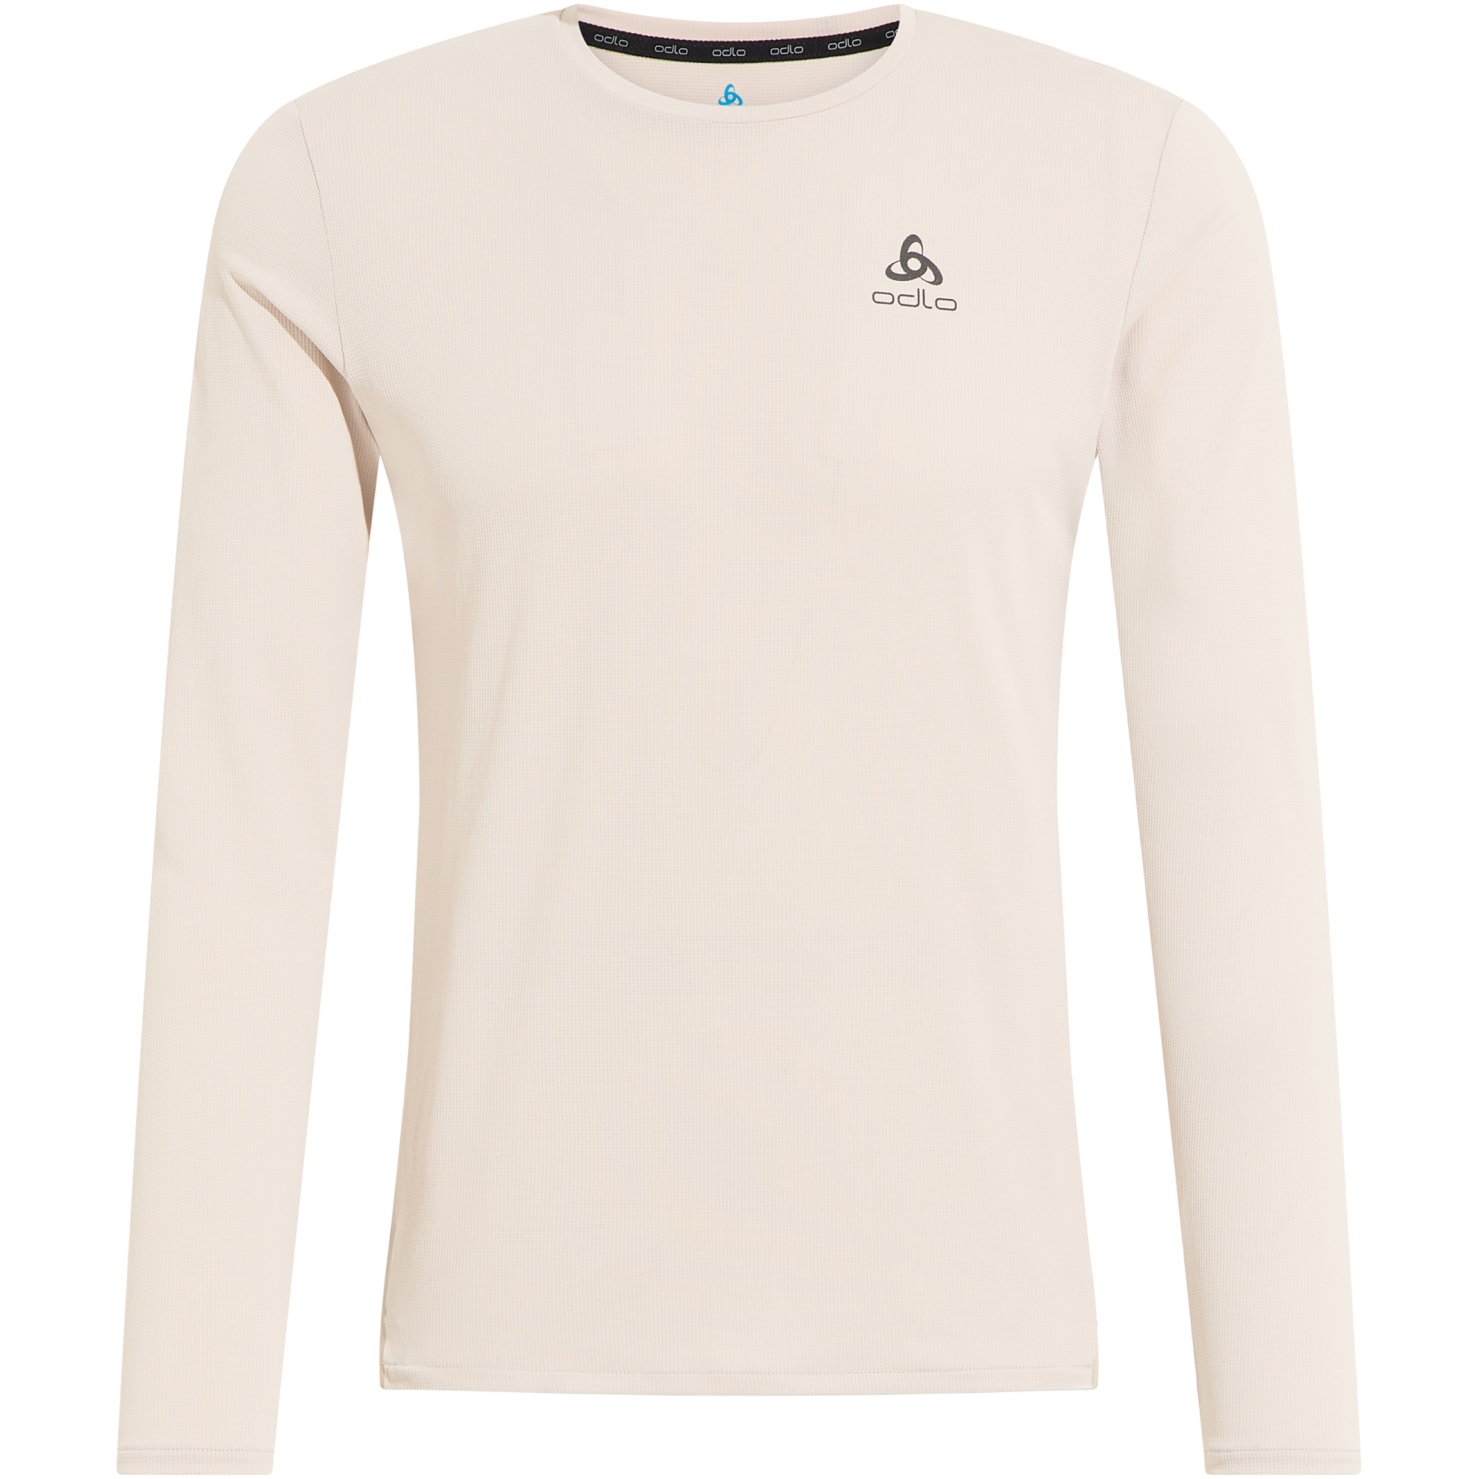 Picture of Odlo Zeroweight Chill-Tec Long Sleeve T-Shirt Men - silver cloud